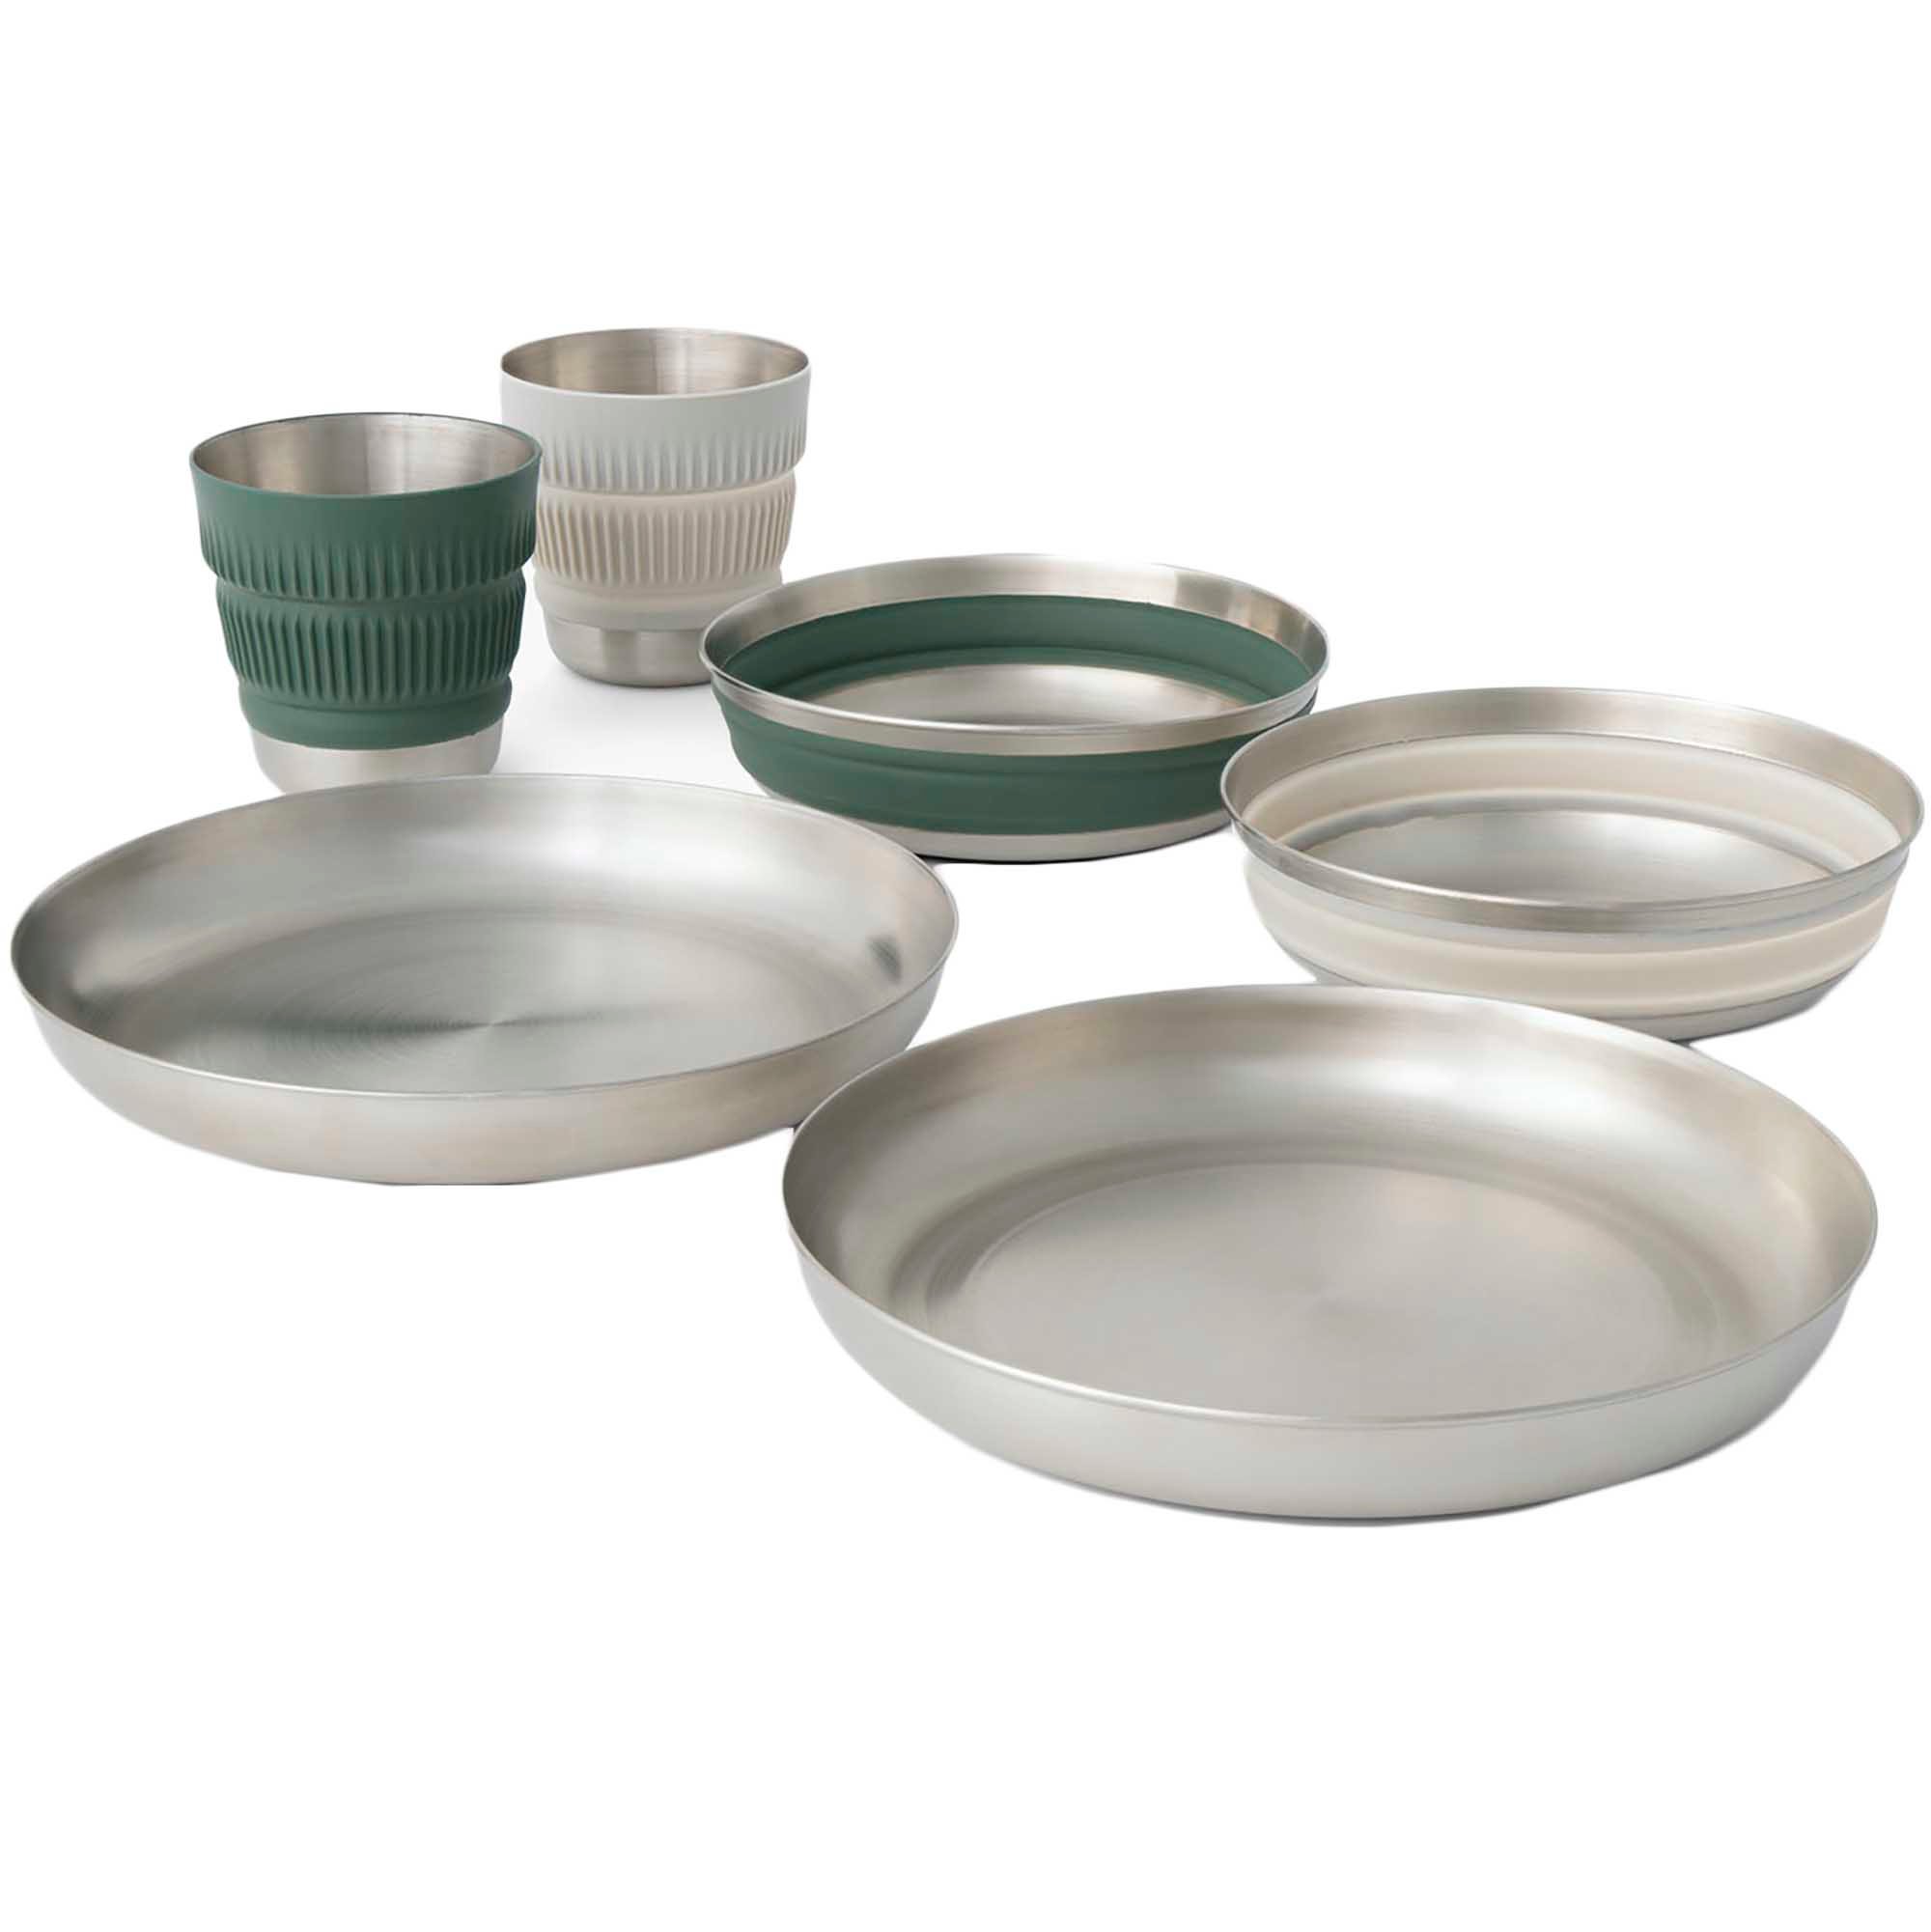 Sea to Summit Detour Stainless Steel 6pc Collapsible Dinnerware Set